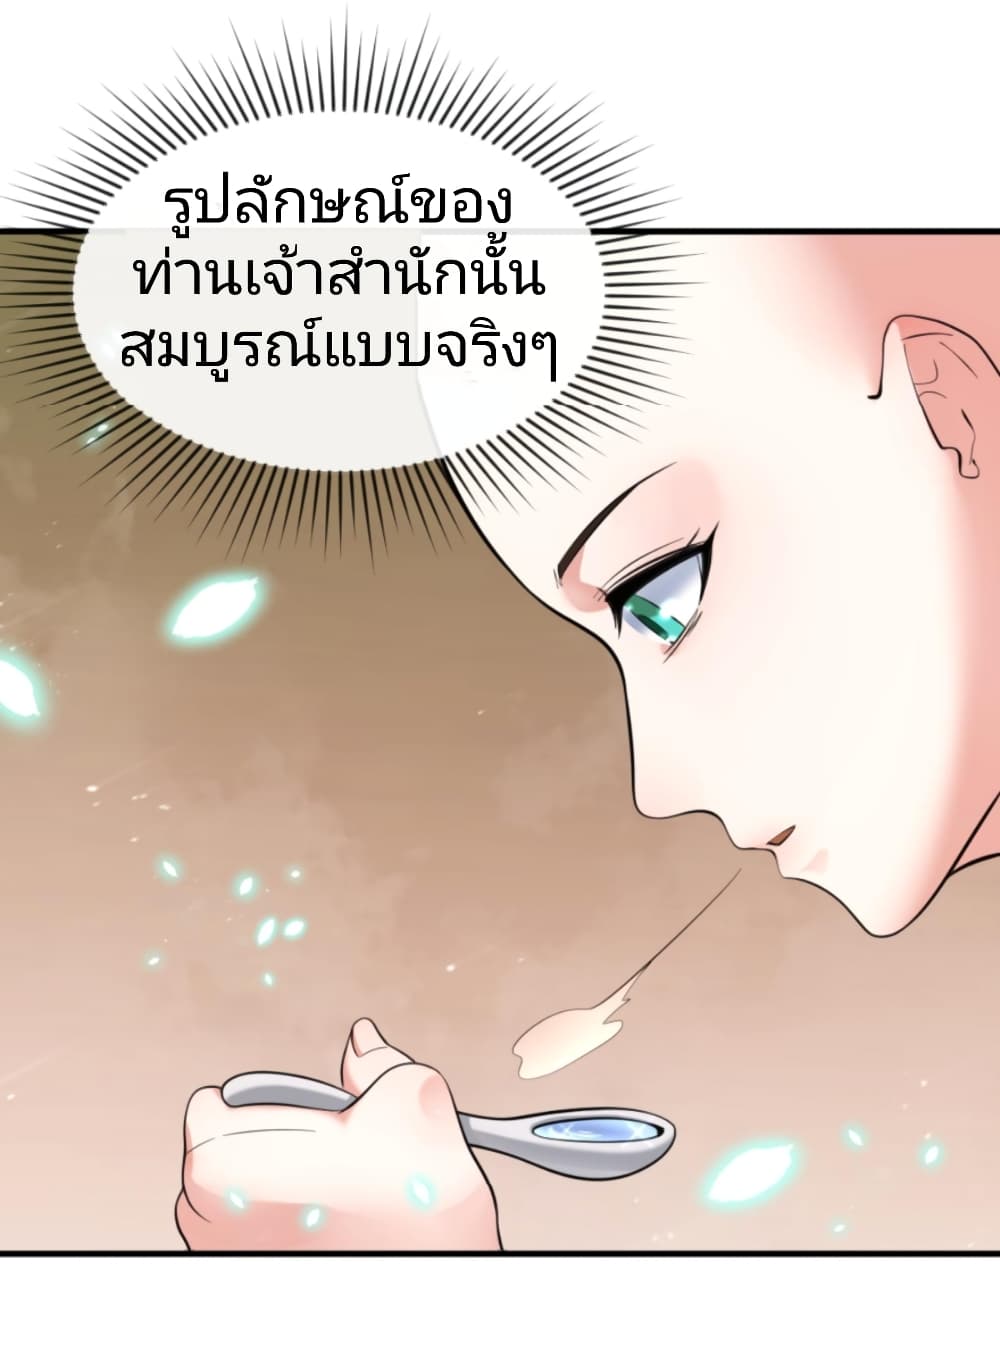 The Age of Ghost Spirits à¸à¸­à¸à¸à¸µà¹ 44 (29)